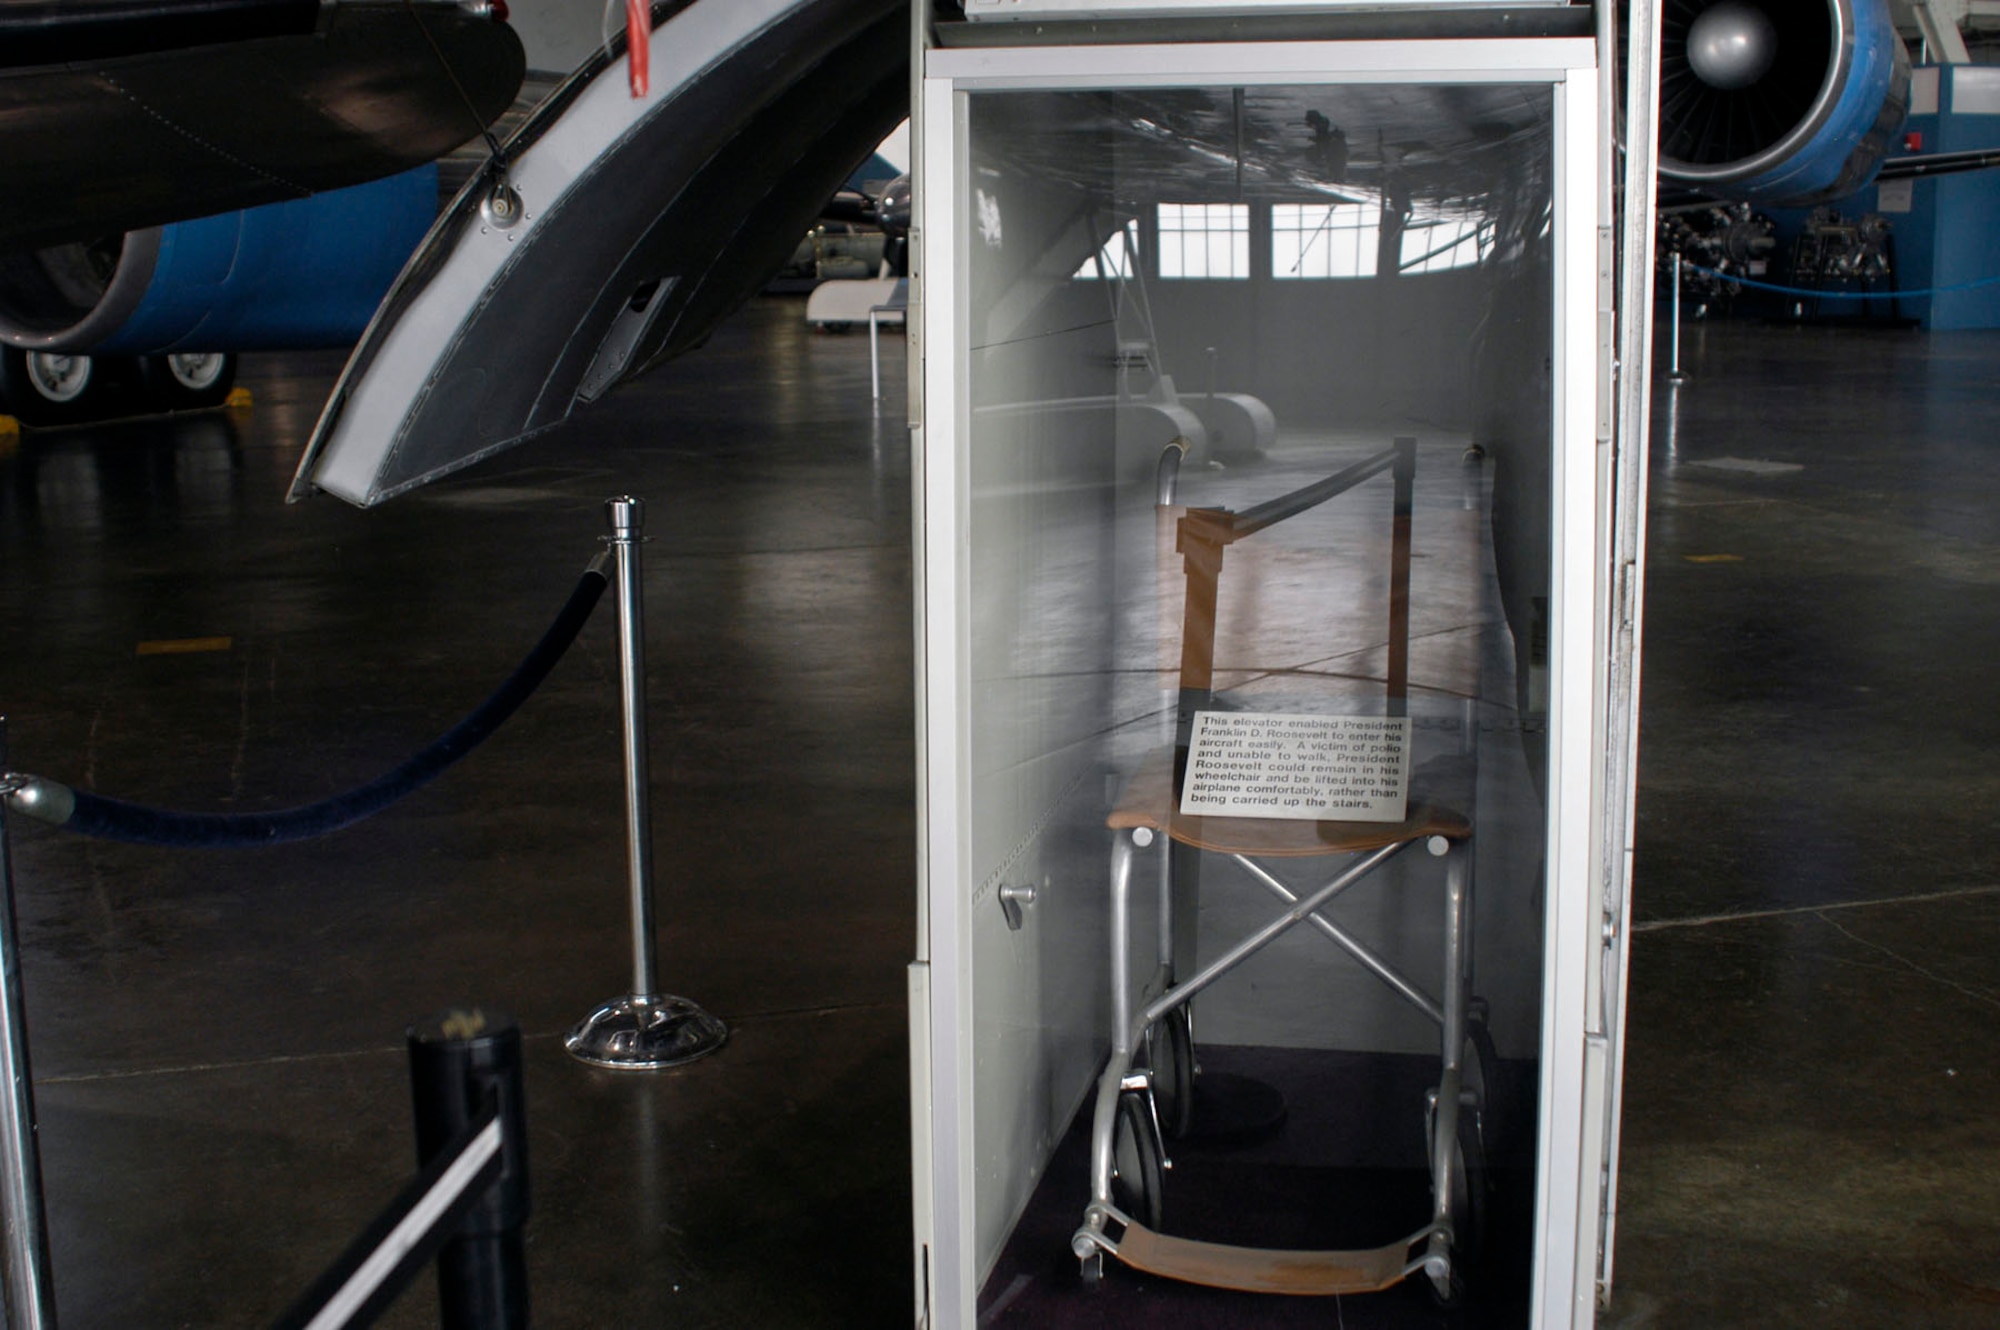 DAYTON, Ohio -- "Sacred Cow" elevator on display in the Presidential Gallery at the National Museum of the United States Air Force. This elevator enabled President Franklin D. Roosevelt to enter the aircraft easily. A victim of polio and unable to walk, President Roosevelt could remain in his wheelchair and be lifted into his airplane comfortably, rather than being carried up the stairs. (U.S. Air Force photo)